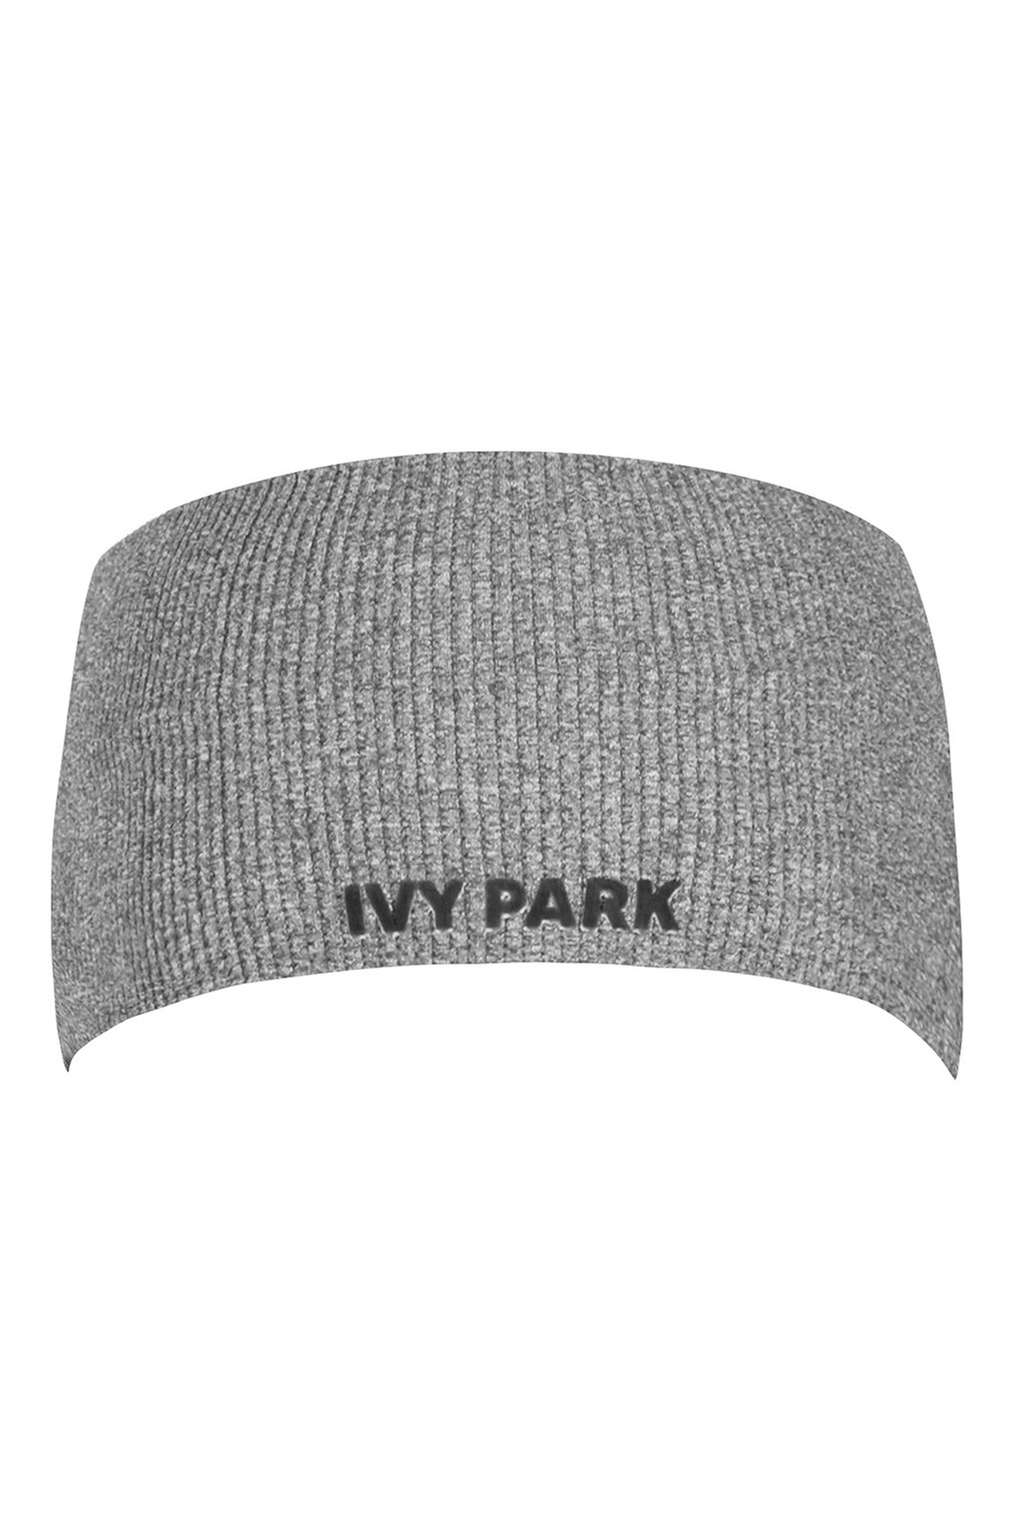 Wide Seamless Headband by Ivy Park